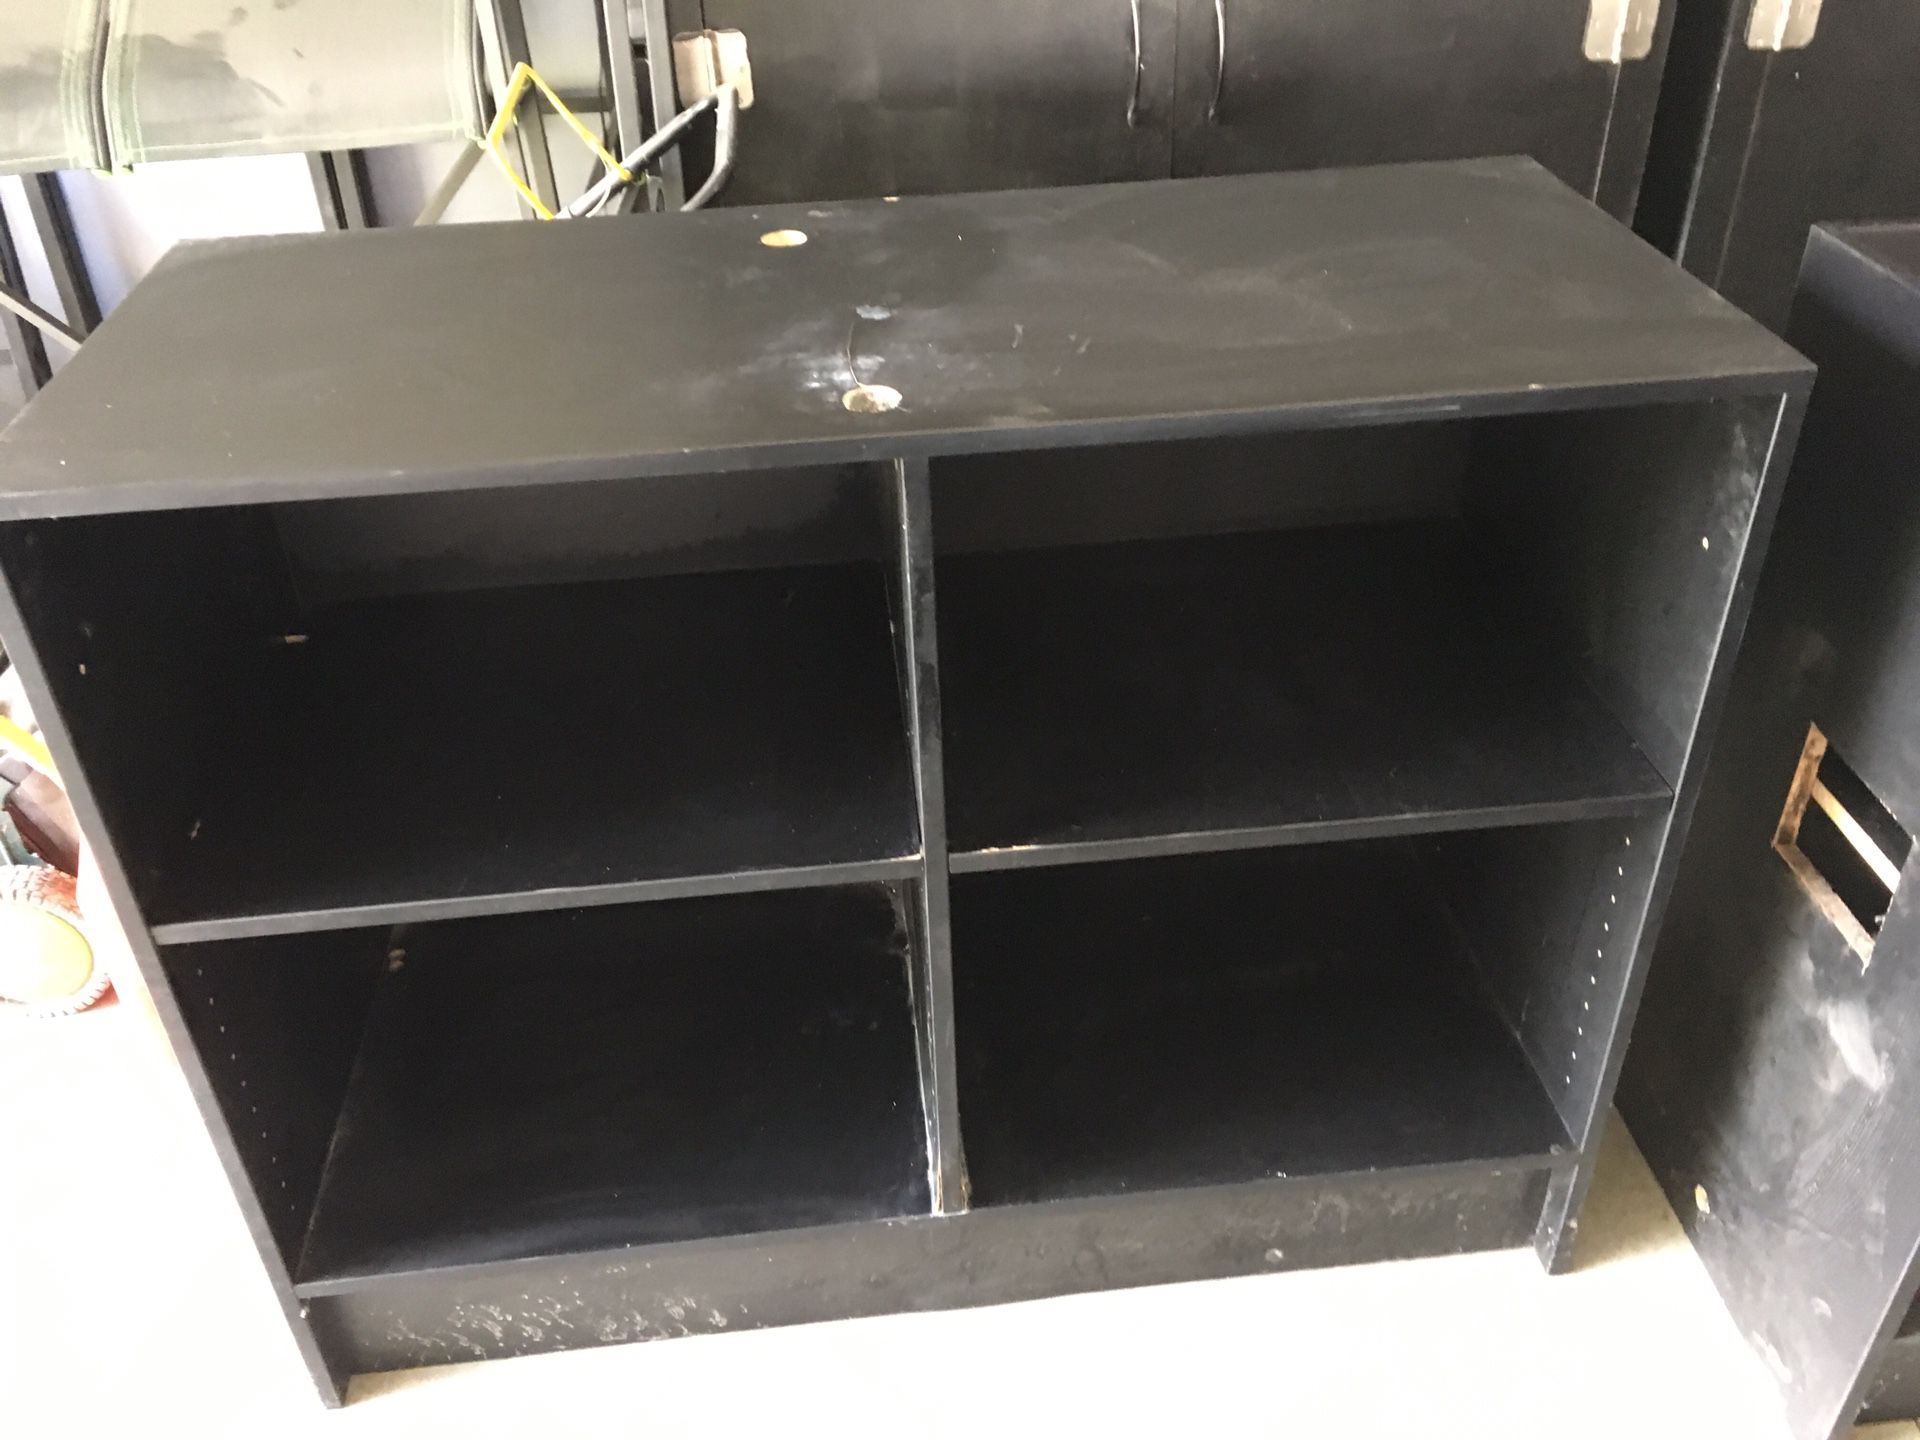 Glass top display cases with corners and drawer end etc.dimensions of display cases are 20” wide x 72” long x 38” high. Glass top and glass shelves